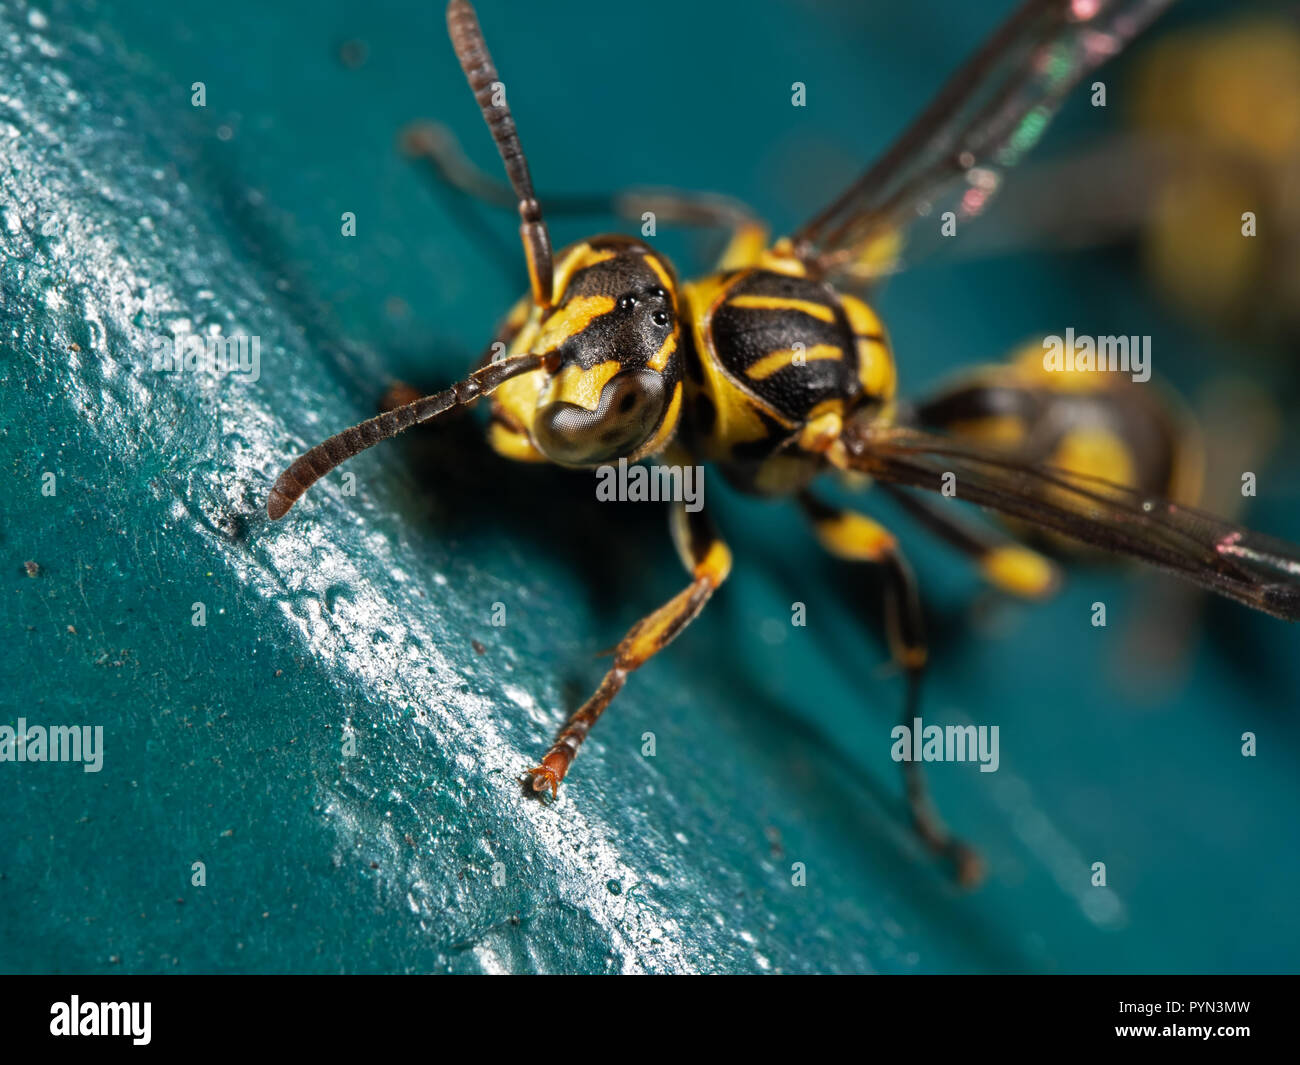 Macro Photography of Head and Antenna of Wasp on Blue Green Metal Material Stock Photo